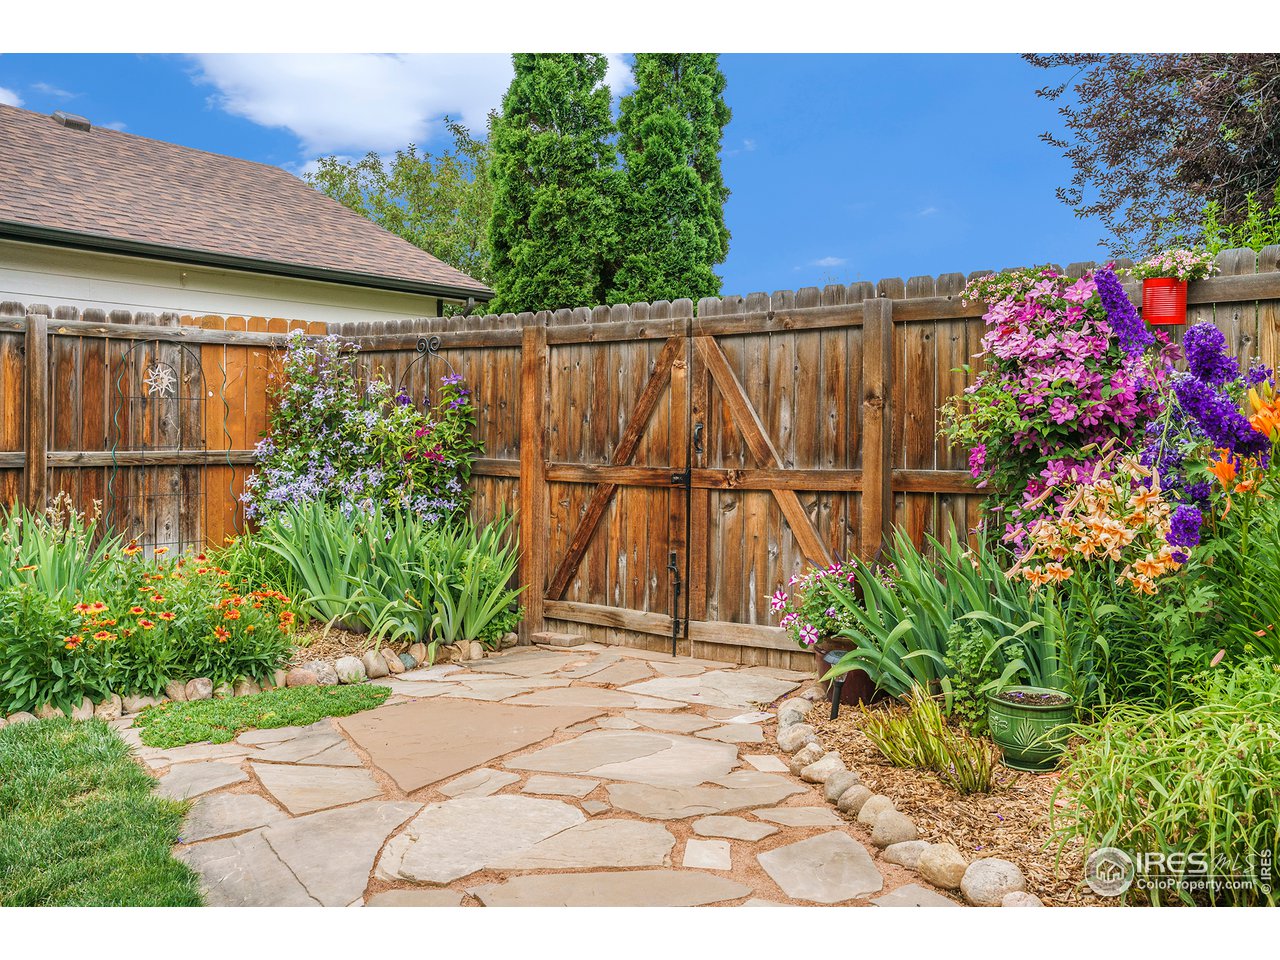 Double gate for easy backyard access